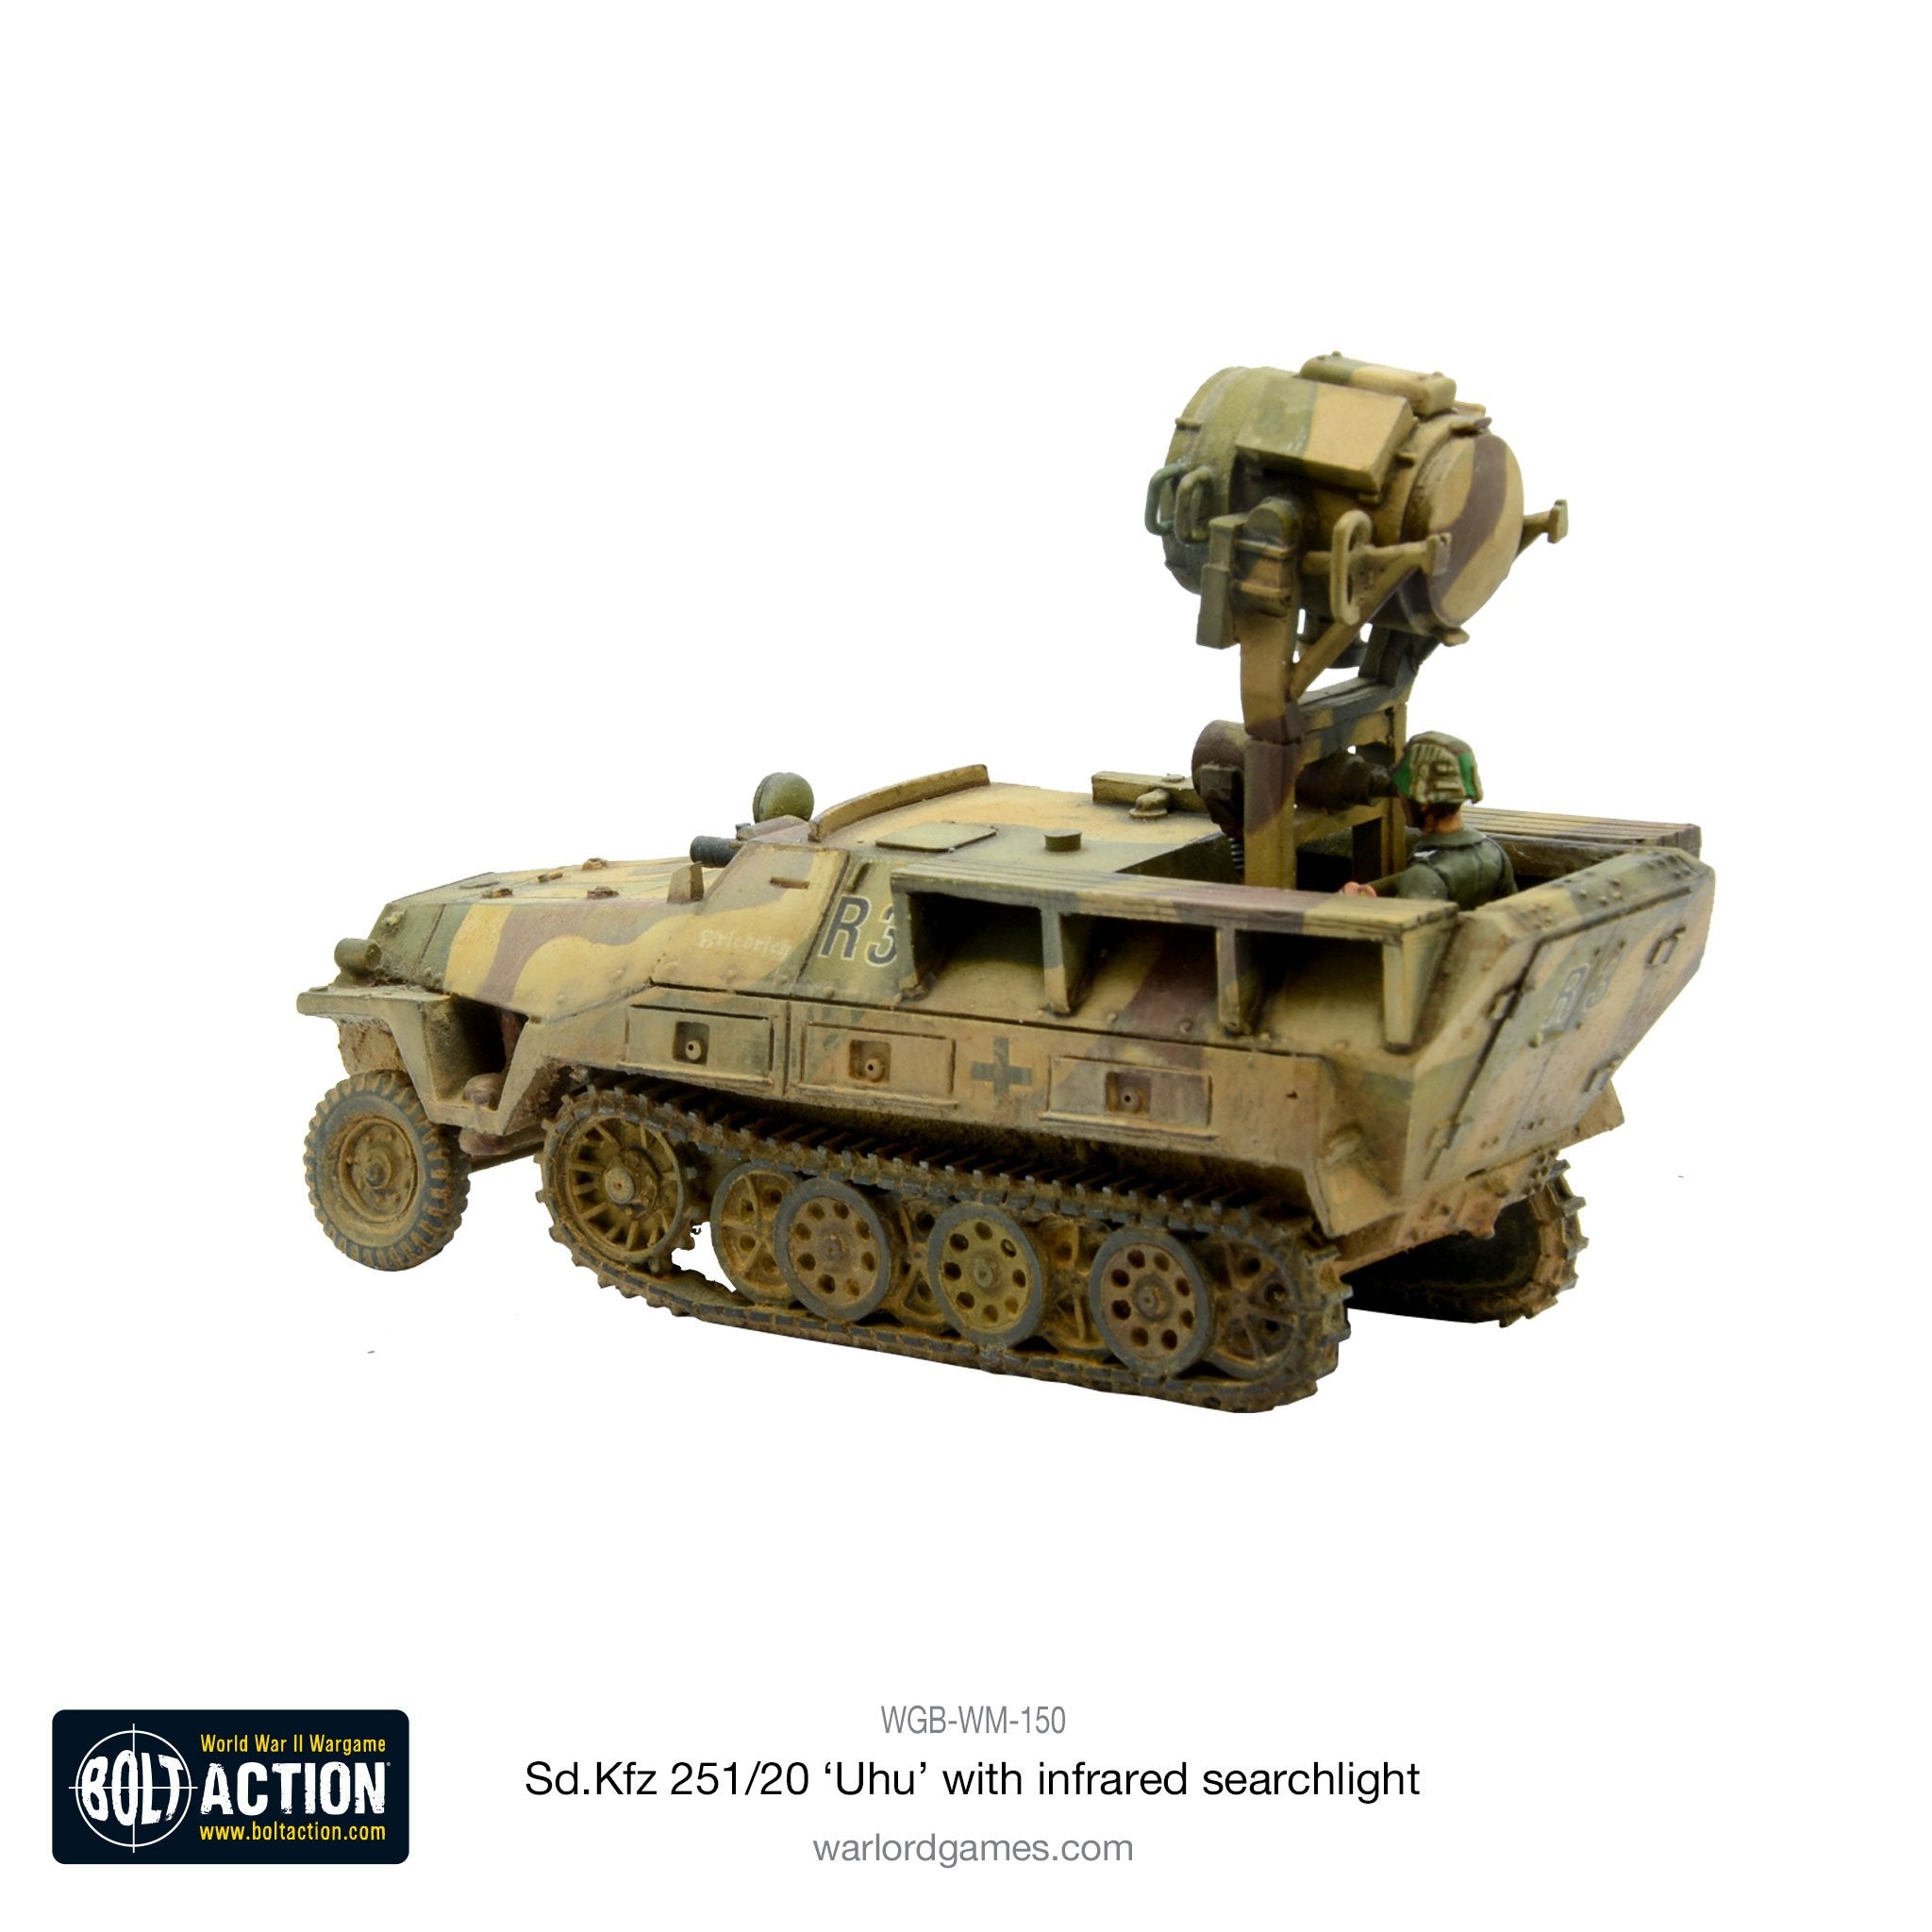 Sd.Kfz 251/20 Uhu with infra-red searchlight